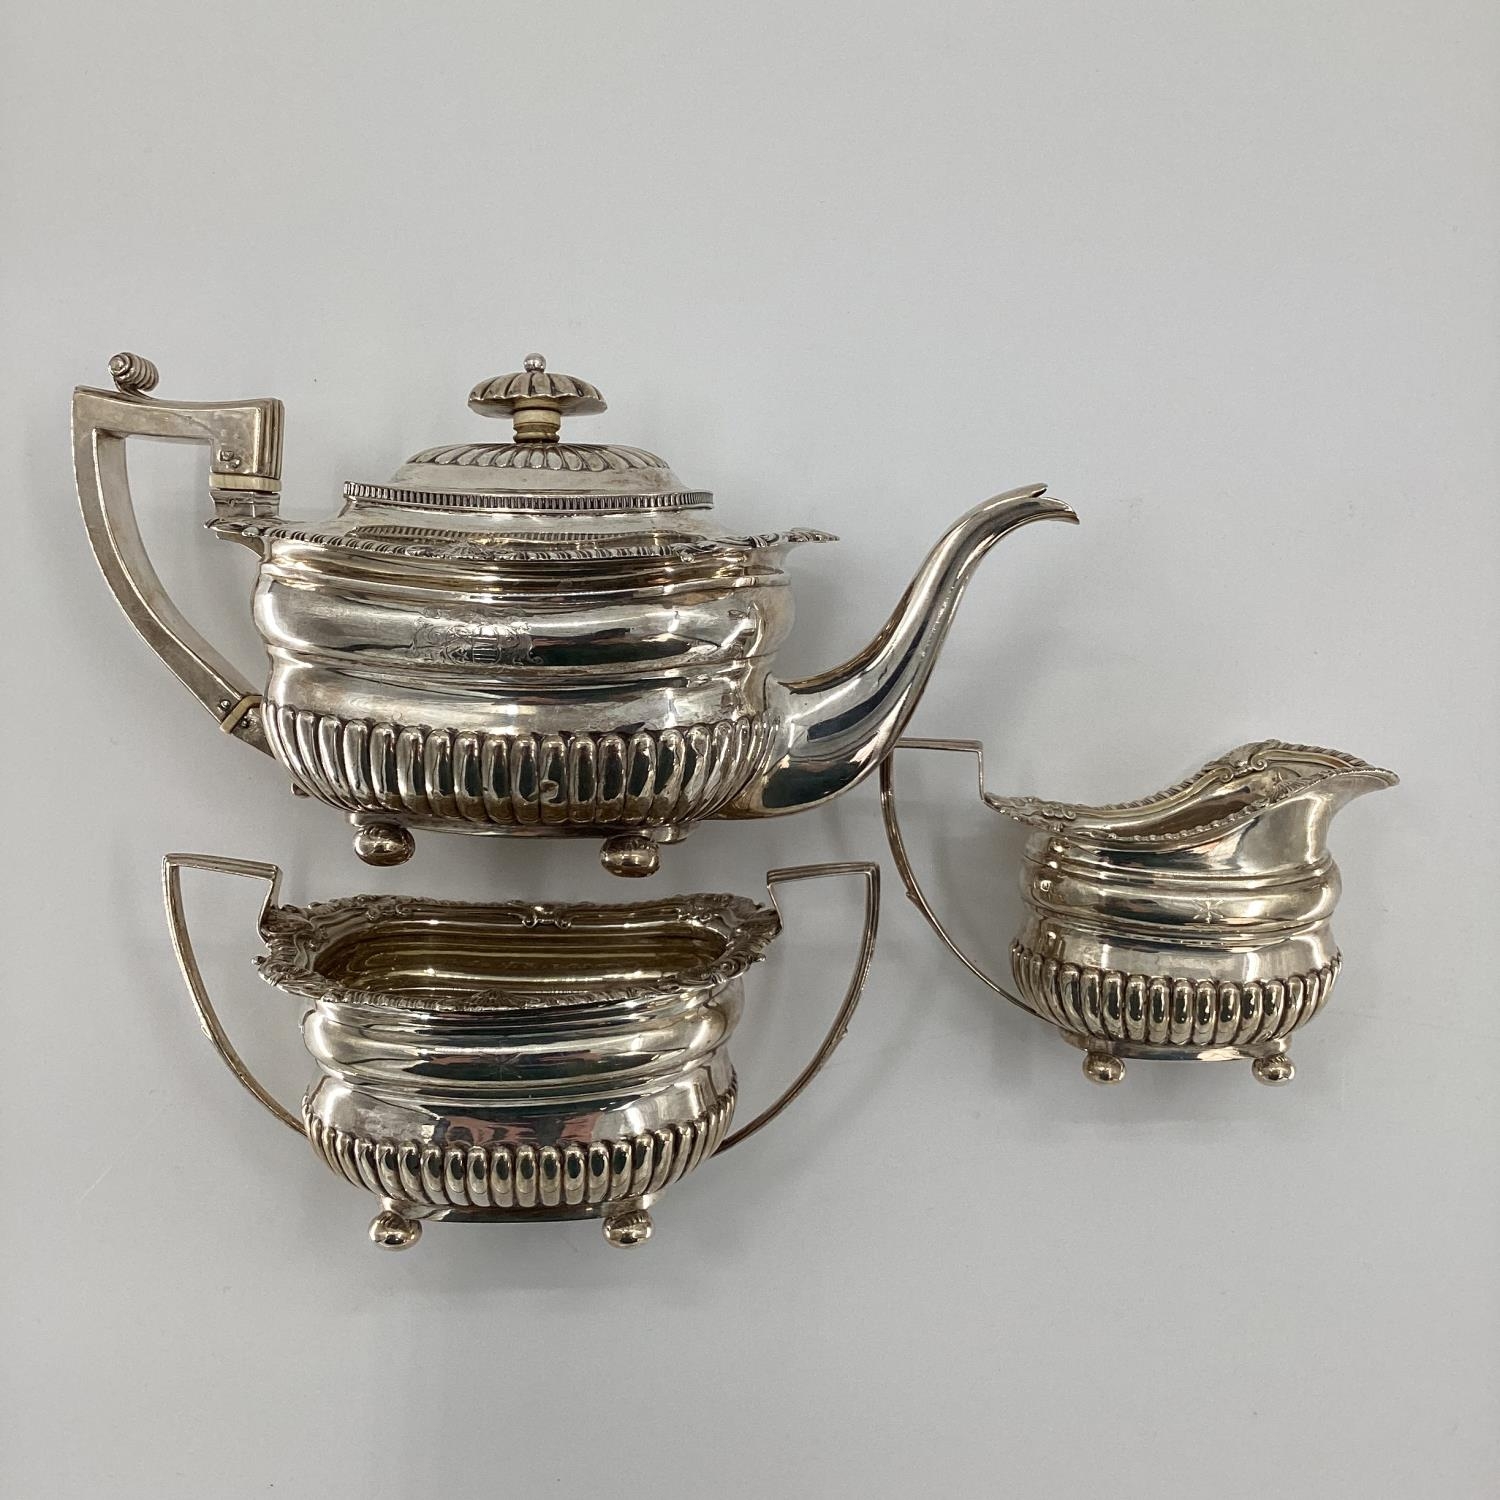 A sterling silver 3 piece tea set of half reeded design by JW Story and W Elliot, Lon - Image 2 of 8